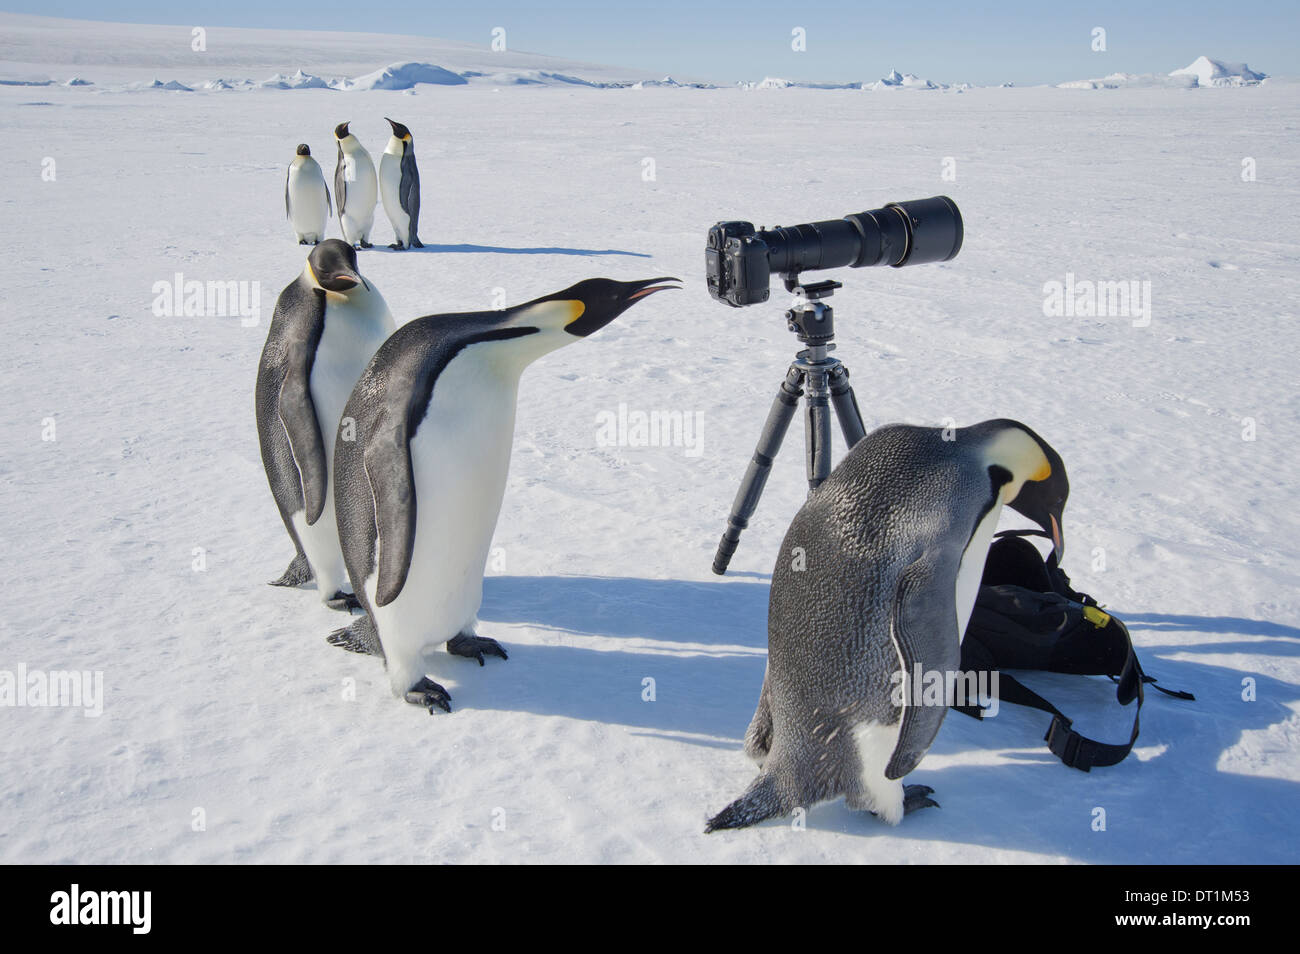 A small group of curious Emperor penguins looking at camera and tripod on the ice A bird peering through the view finder Stock Photo